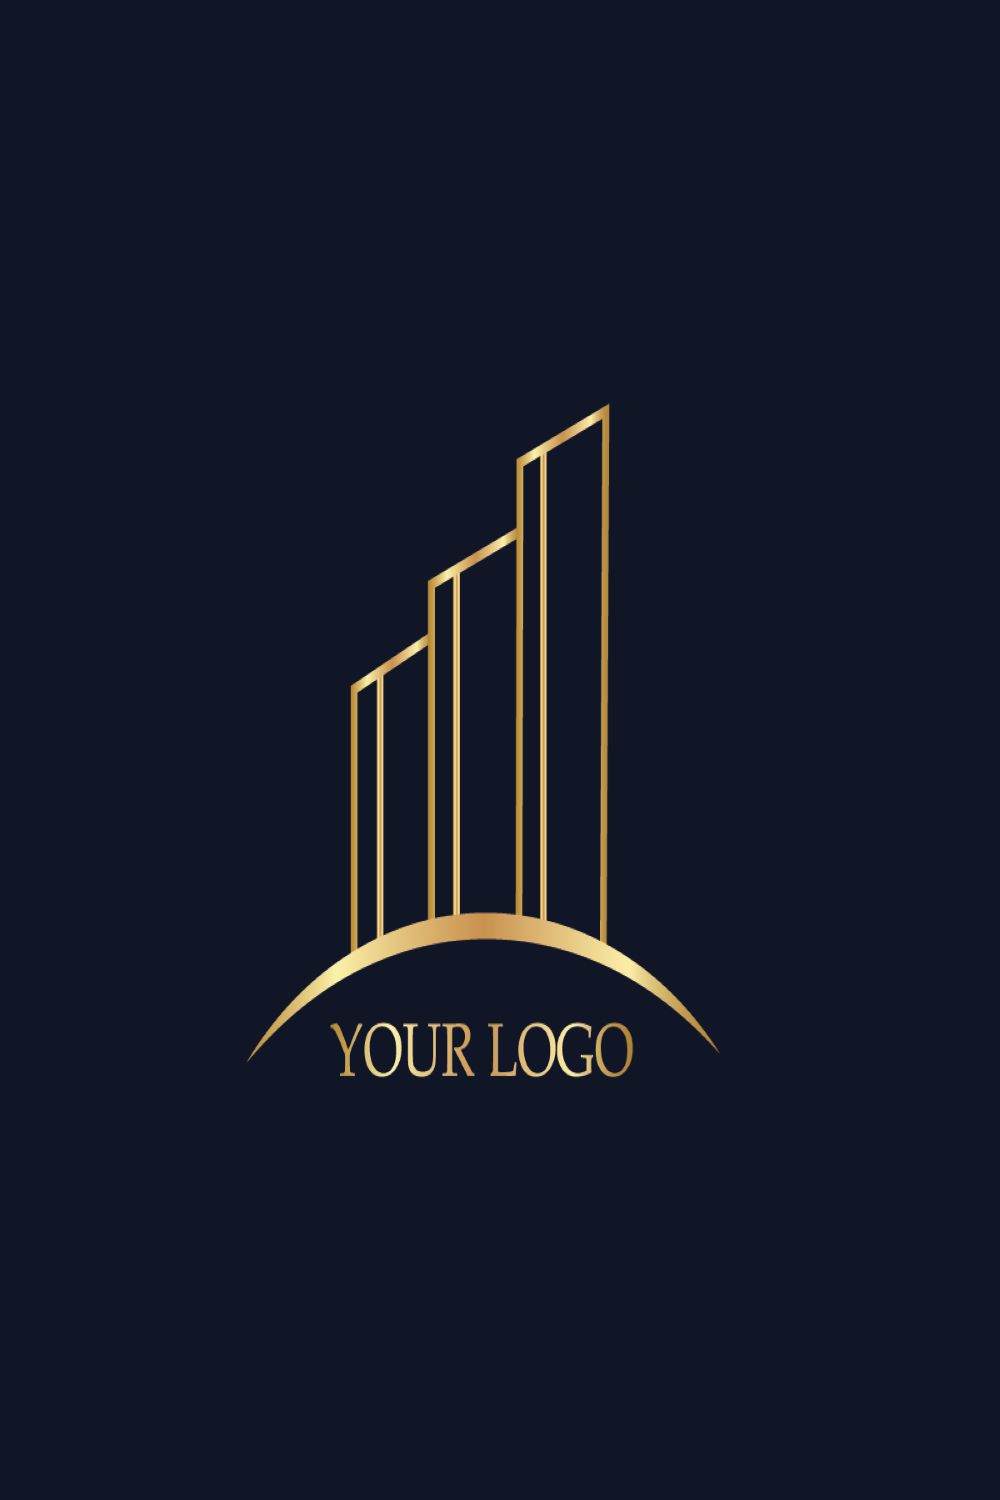 Charming gold color skyscraper logo on a black background.